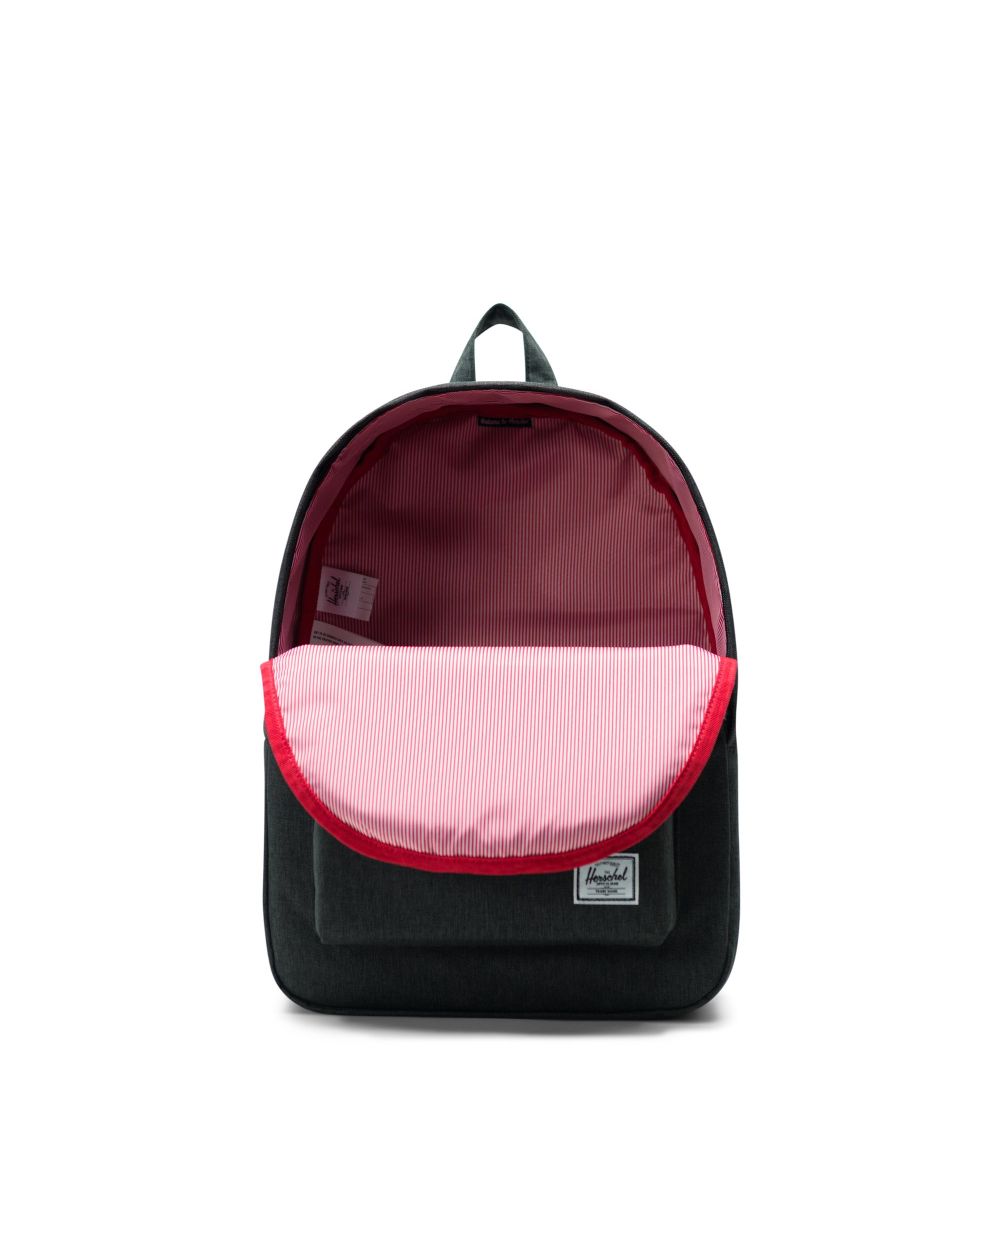 Classic Backpack 24L| Herschel Supply Co.